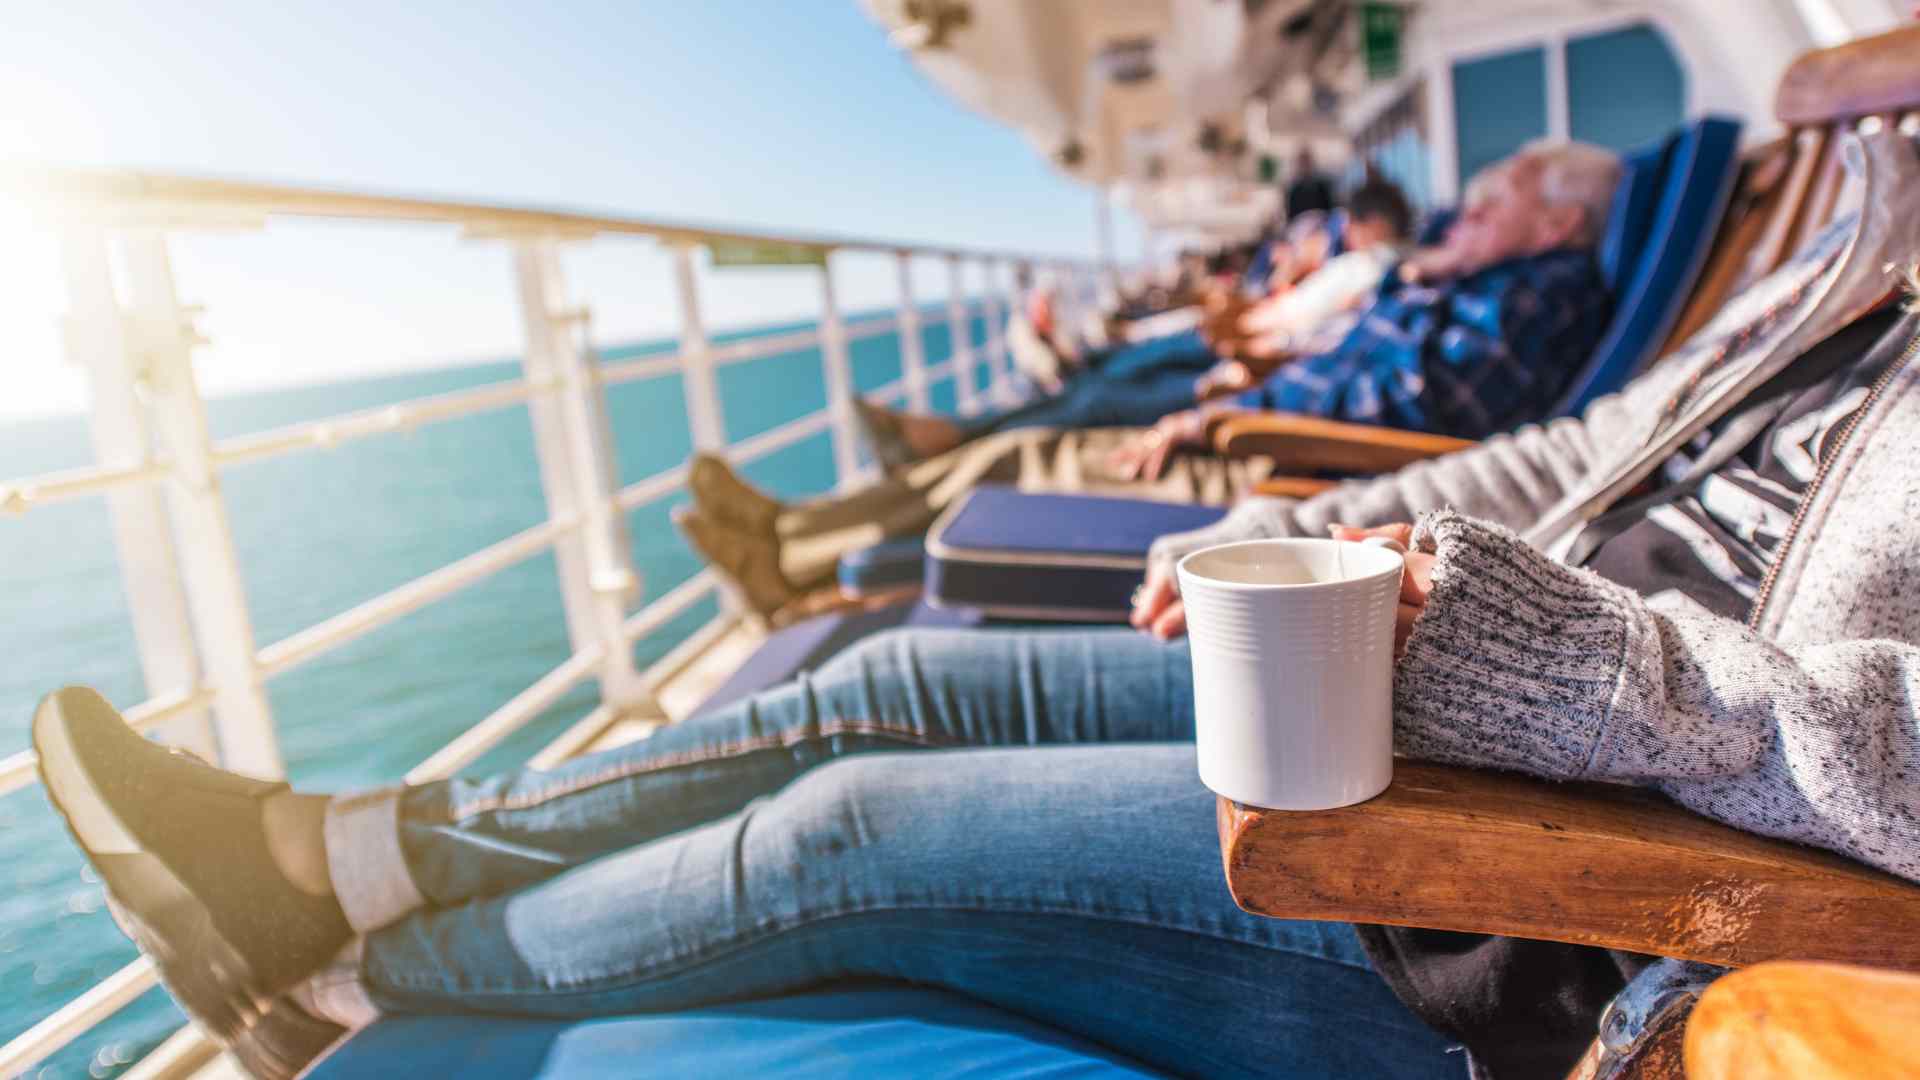 Life Onboard